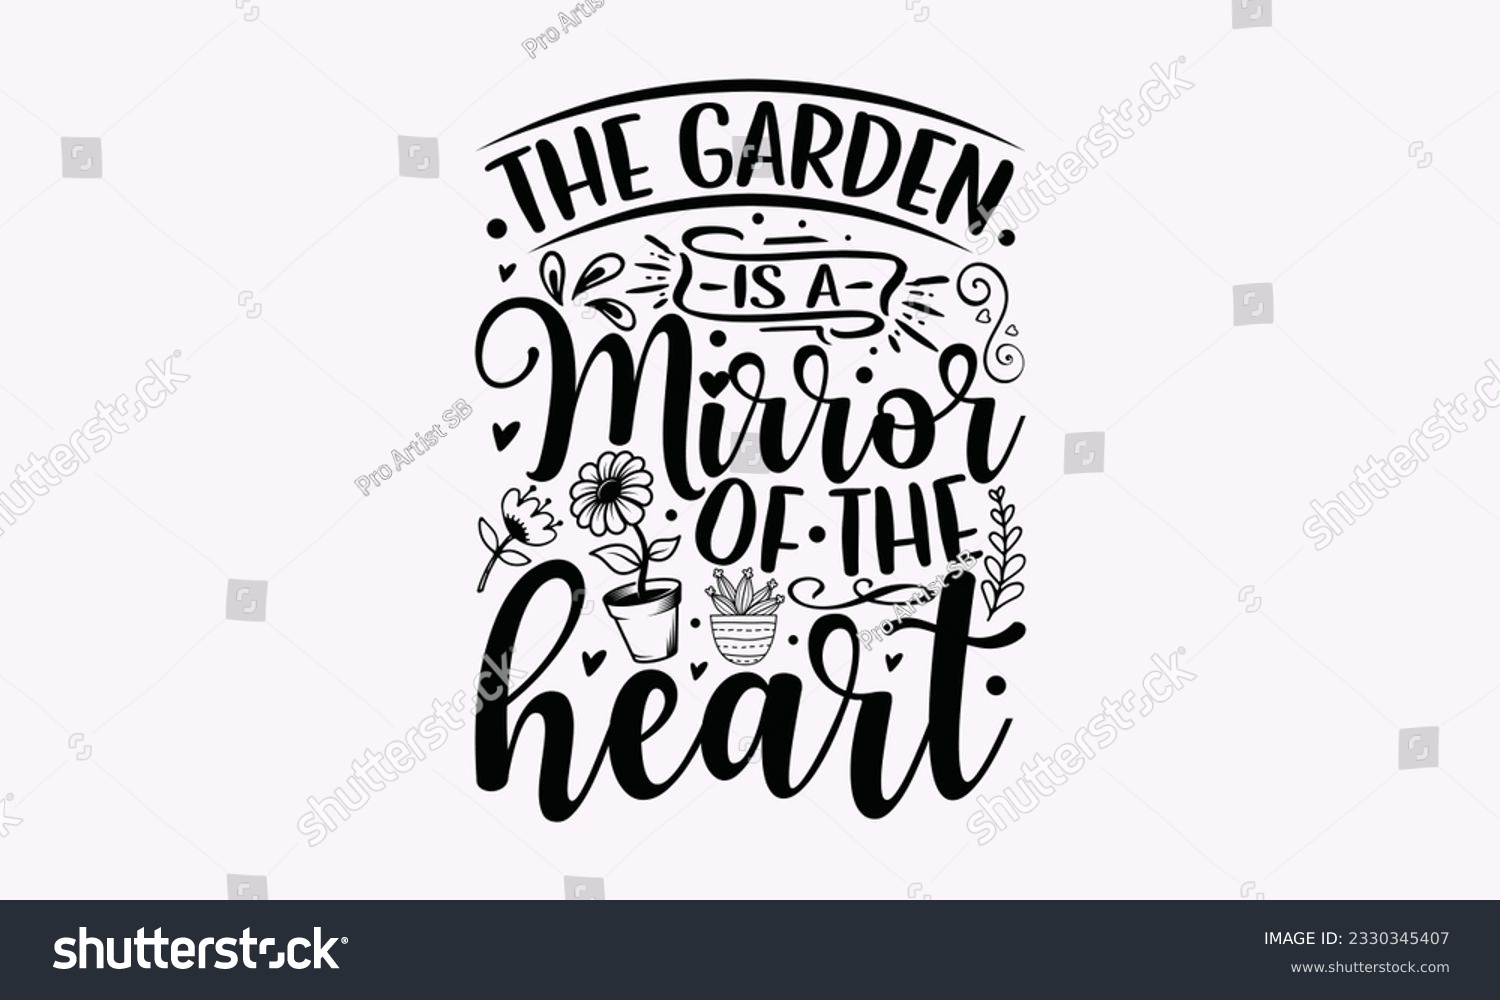 SVG of The garden is a mirror of the heart - Gardening SVG Design, Flower Quotes, Calligraphy graphic design, Typography poster with old style camera and quote. svg